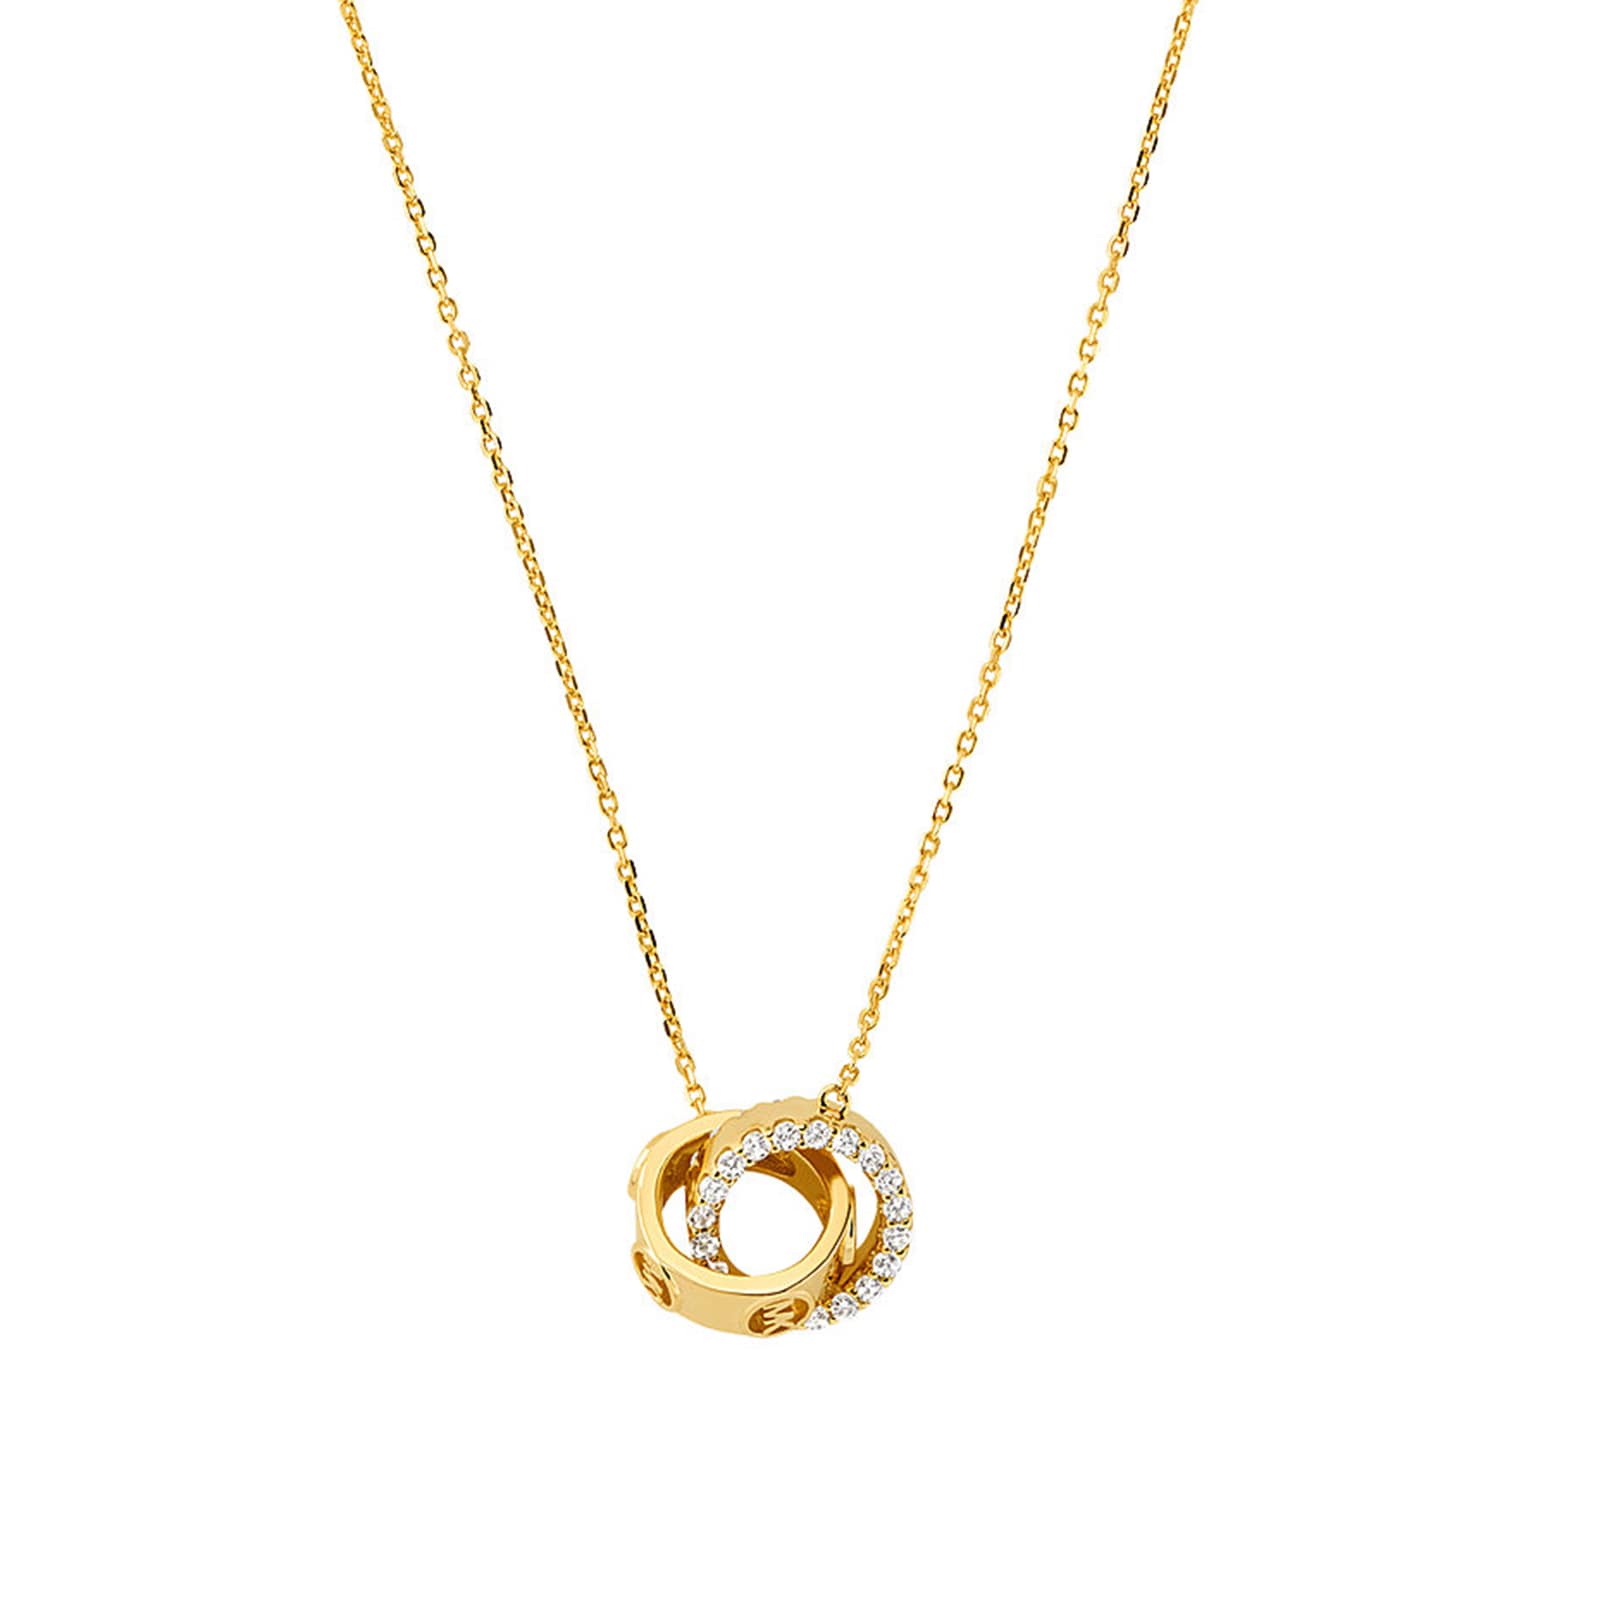 Michael Kors 14ct Yellow Gold Coloured Cubic Zirconia Ring Necklace ...